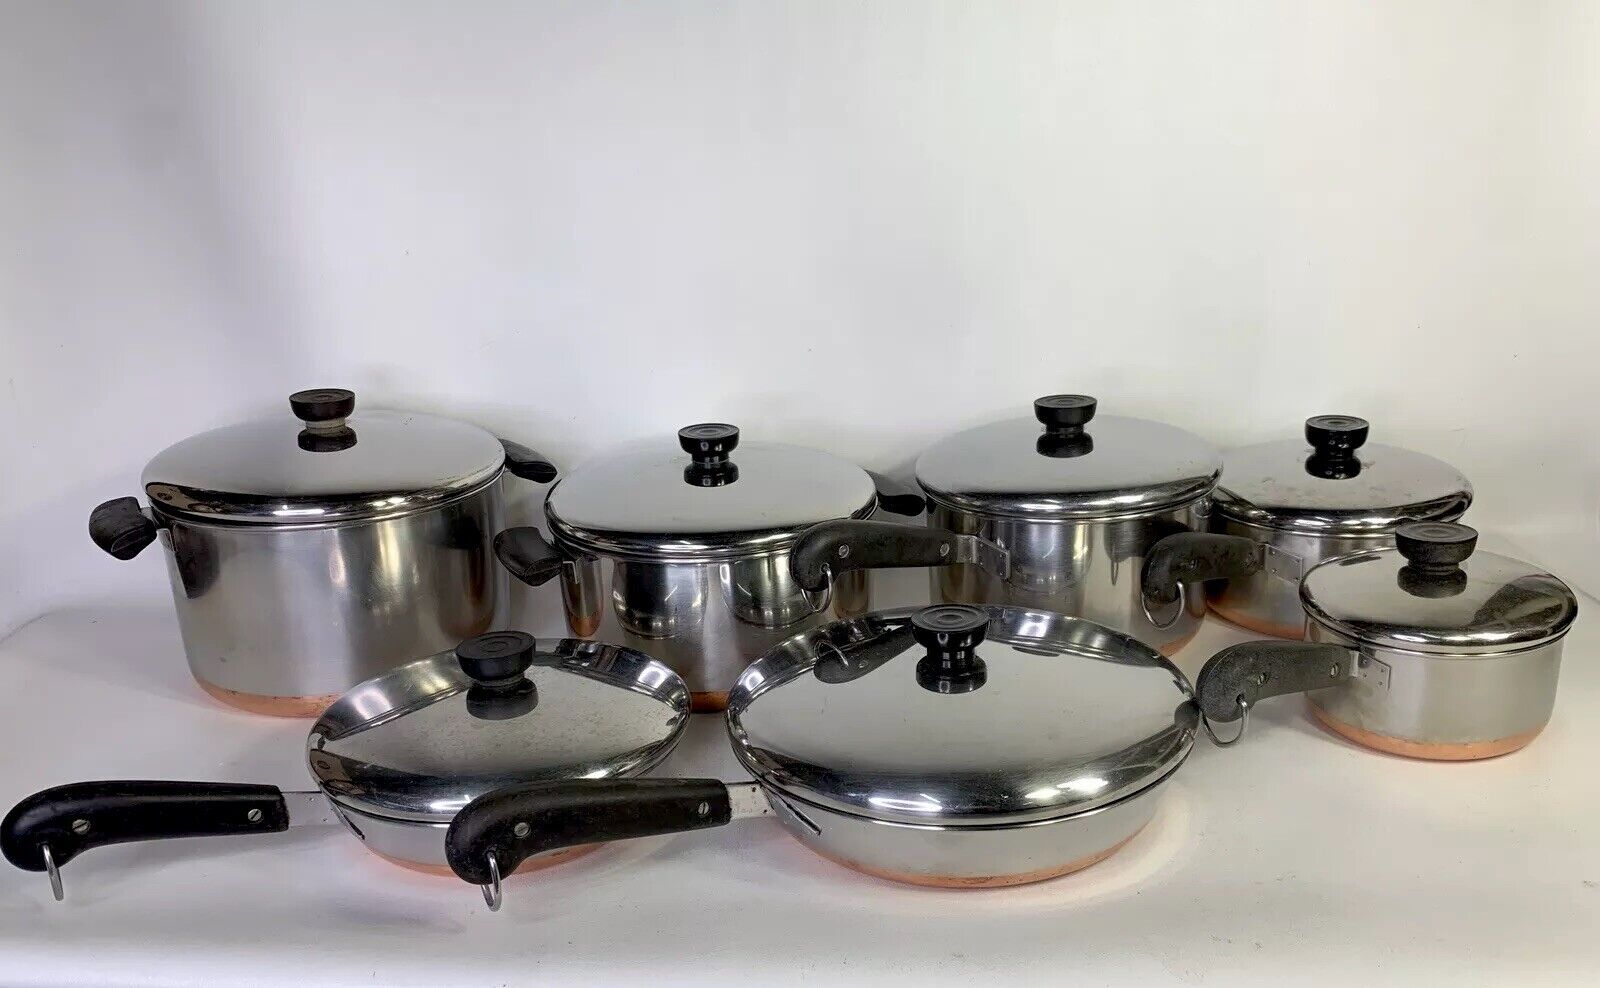 Vintage Revere Ware Copper Bottom Stainless Steel 14 Piece Cookware Set Clean